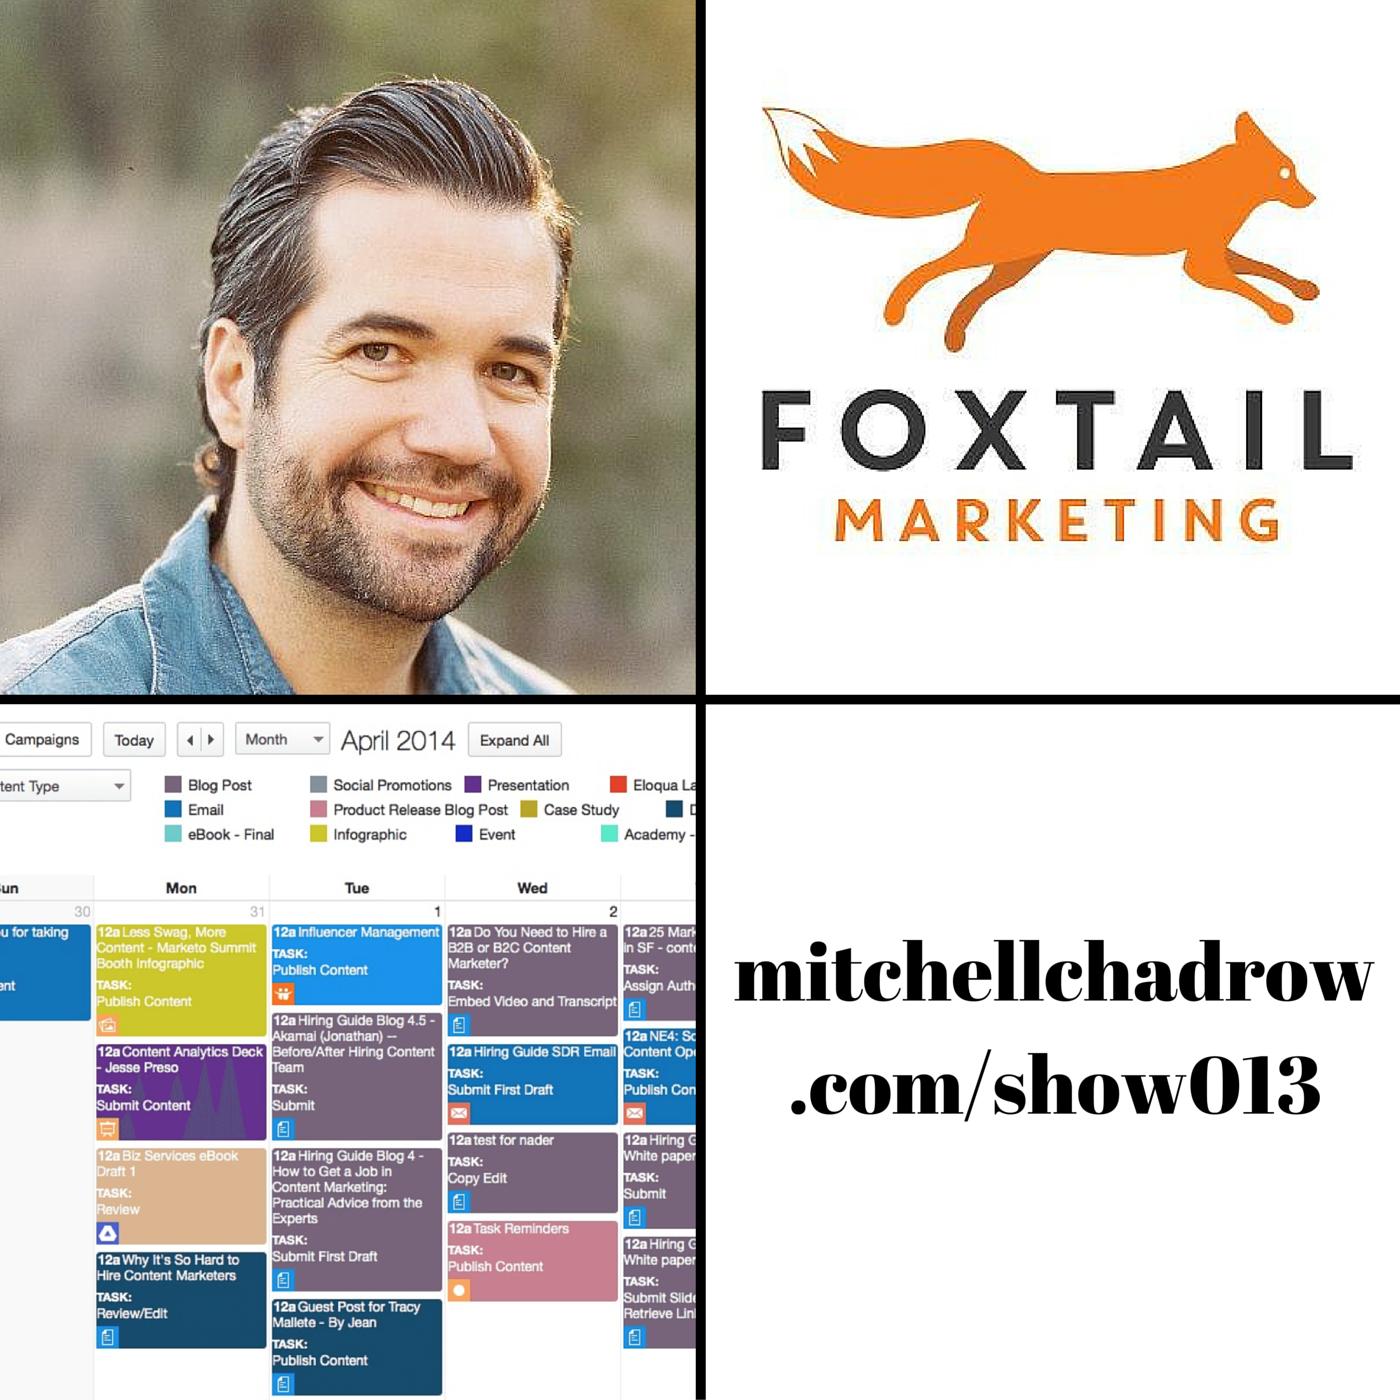 Digital Marketing Industry Agency SEO, Social, Paid, and Content Foxtail Founder Mike Templeman Show 013